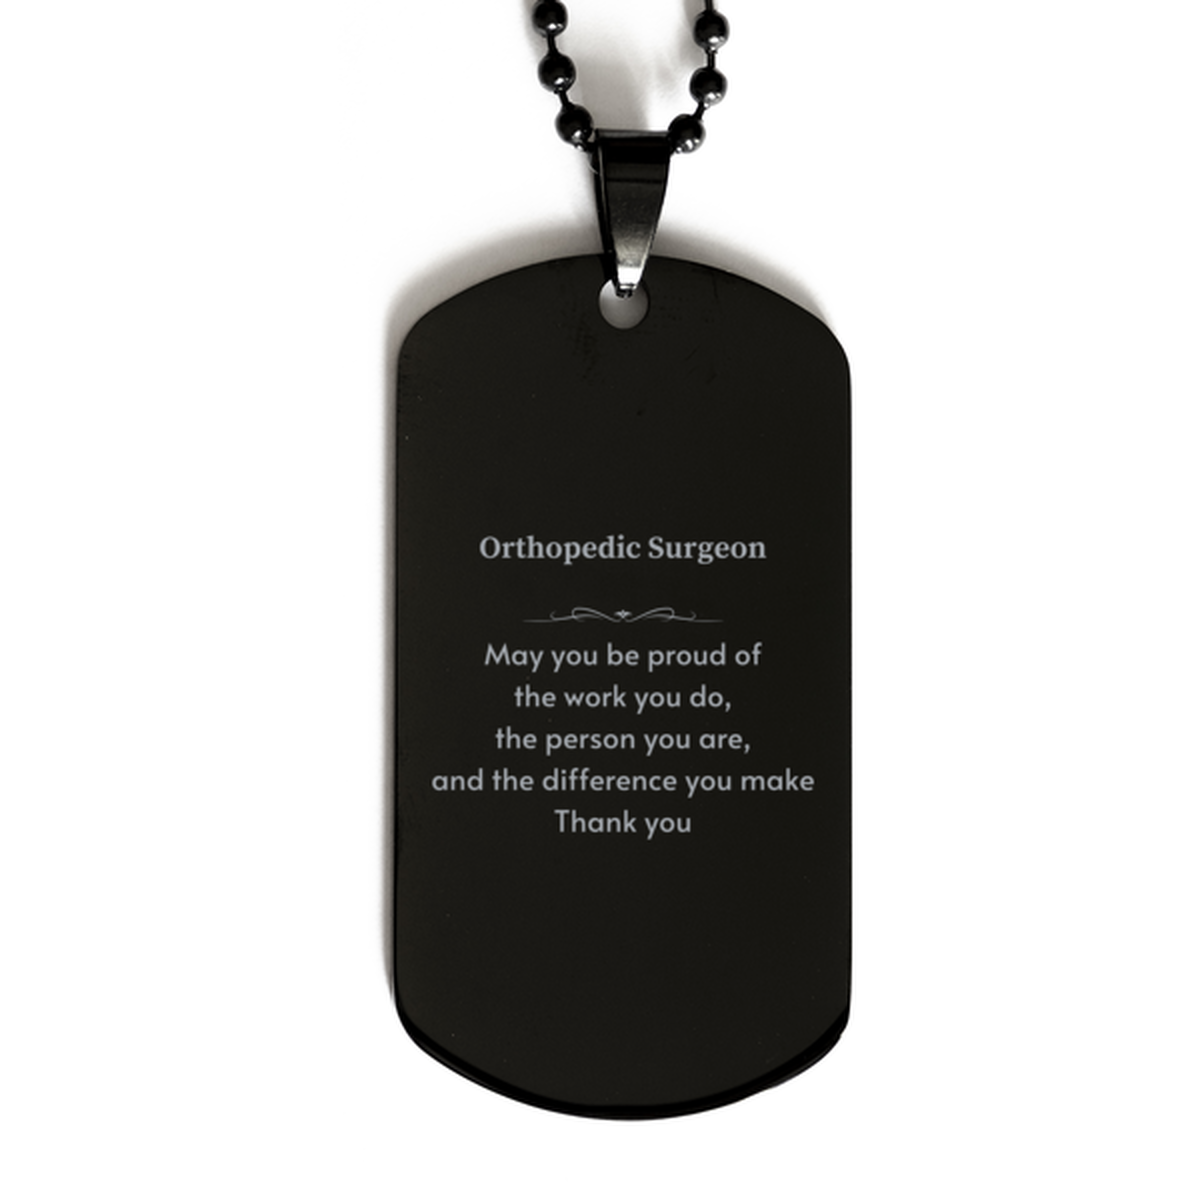 Heartwarming Black Dog Tag Retirement Coworkers Gifts for Orthopedic Surgeon, Orthopedic Surgeon May You be proud of the work you do, the person you are Gifts for Boss Men Women Friends